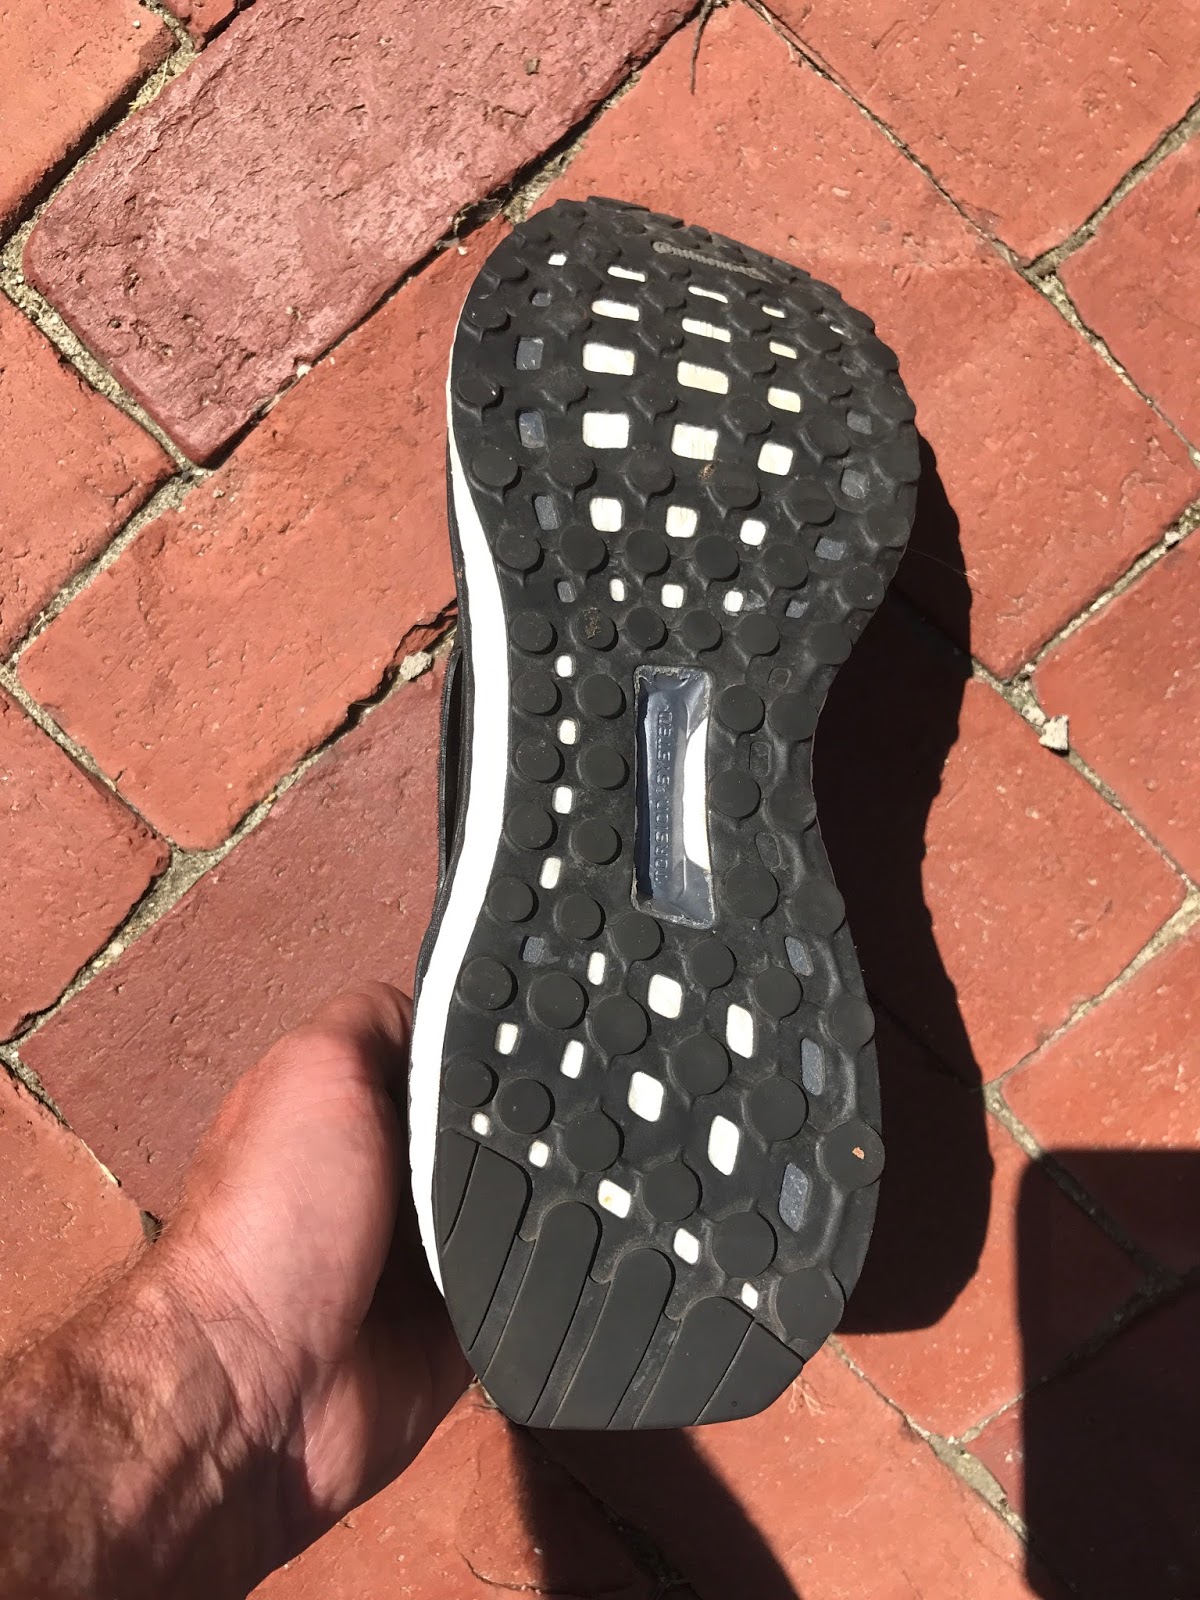 adidas energy boost 4 review